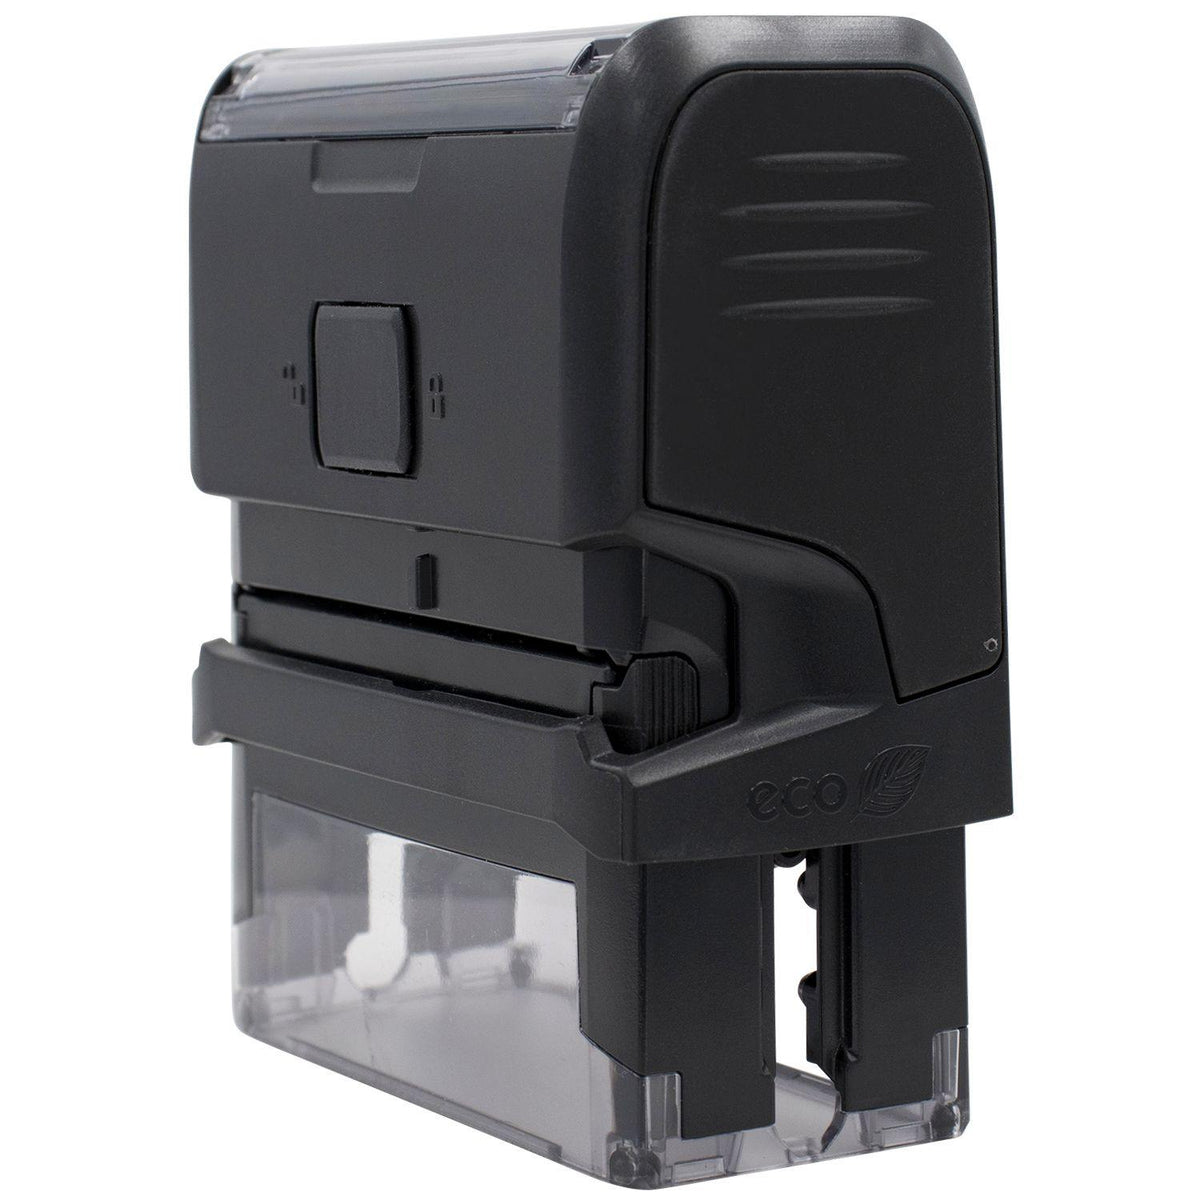 Large Self Inking Two Line Received Stamp - Engineer Seal Stamps - Brand_Trodat, Impression Size_Large, Stamp Type_Self-Inking Stamp, Type of Use_Professional